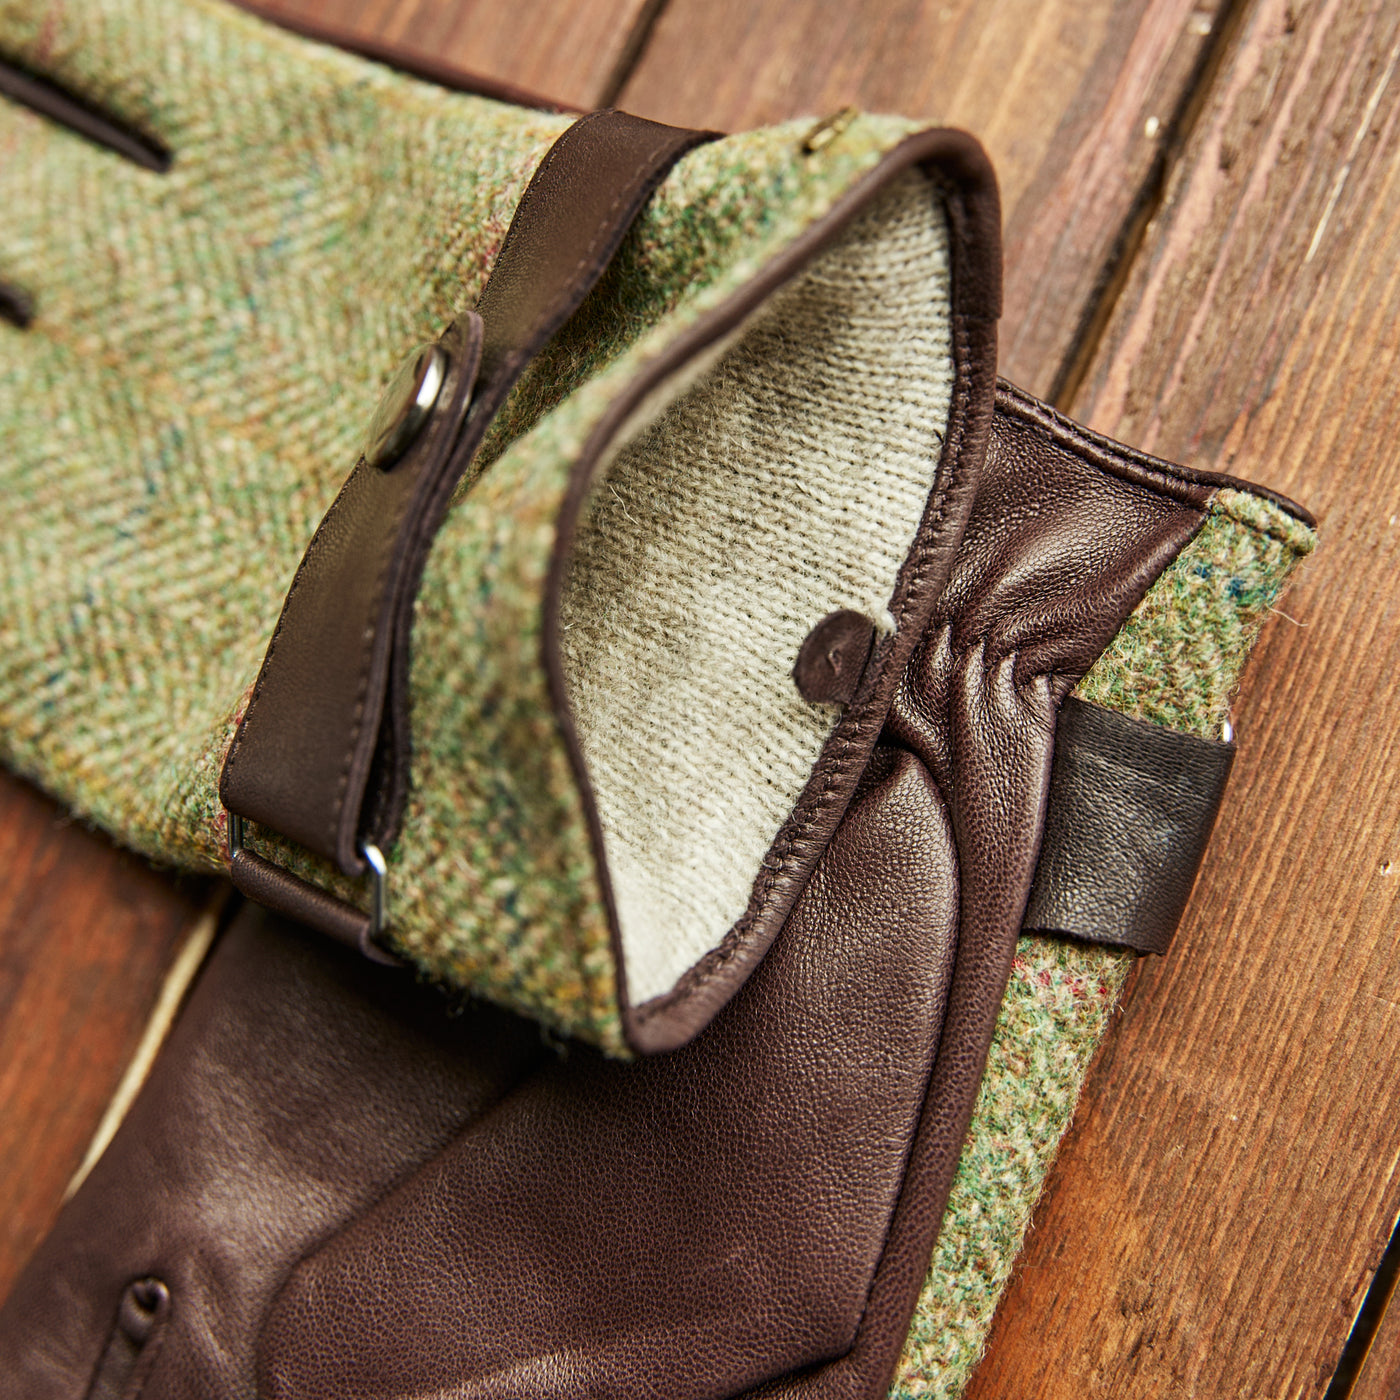 MJM GLOVES KYLE LEATHER/WOOL GREEN